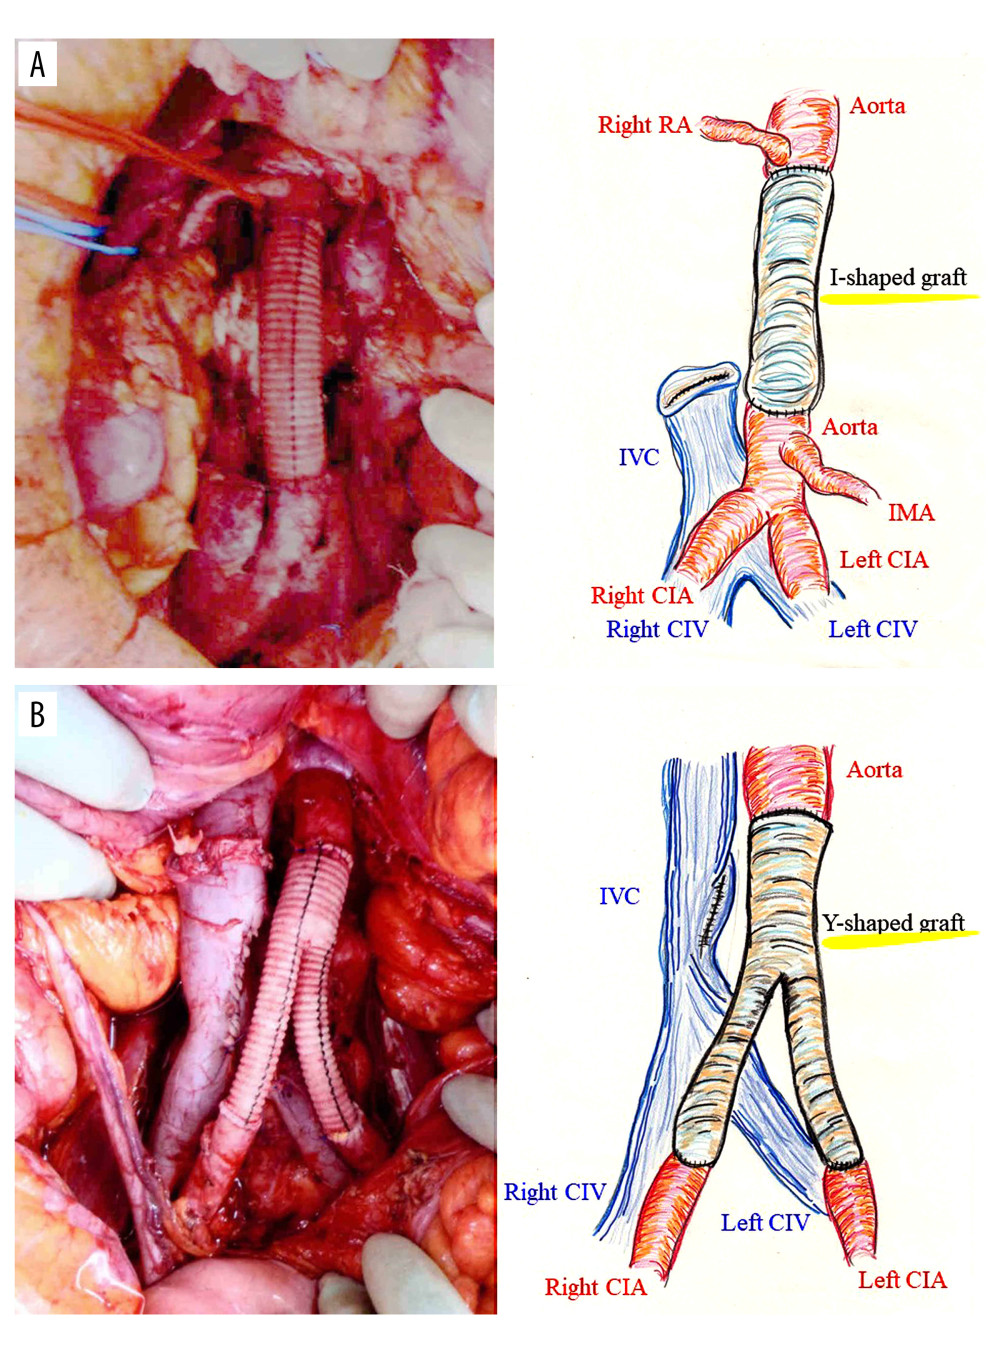 Arterial reconstruction using synthetic arterial graft. (A) An I-shaped graft was used to replace the abdominal aorta from the lower level of the renal artery to the upper level of the inferior mesenteric artery (Case 1). (B) A Y-shaped graft was used to replace the aorta from the root of the inferior mesenteric artery to the common iliac arteries 1 cm distal to the bifurcation bilaterally (Case 2). CIA – common iliac artery; CIV – common iliac vein; IMA – inferior mesenteric artery; IVC – inferior vena cava; SAG – synthetic arterial graft; RA – renal artery.